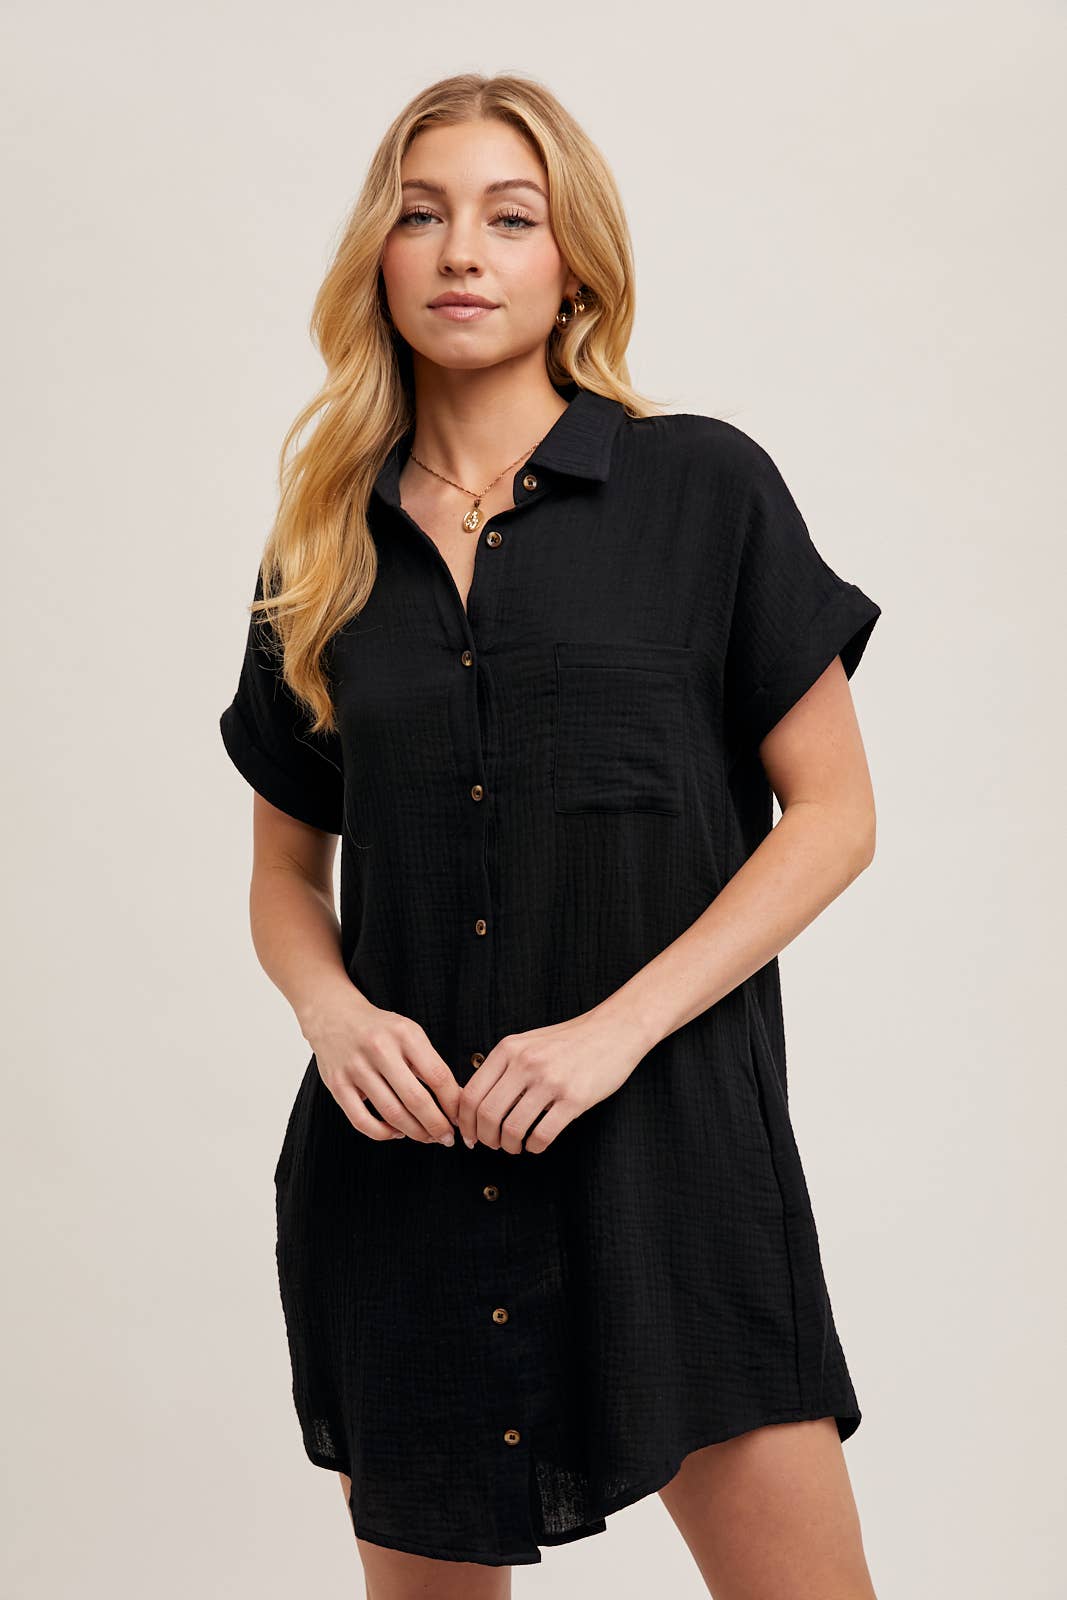 Betsy - BUTTON UP SHIRT DRESS WITH POCKET - Bluivy